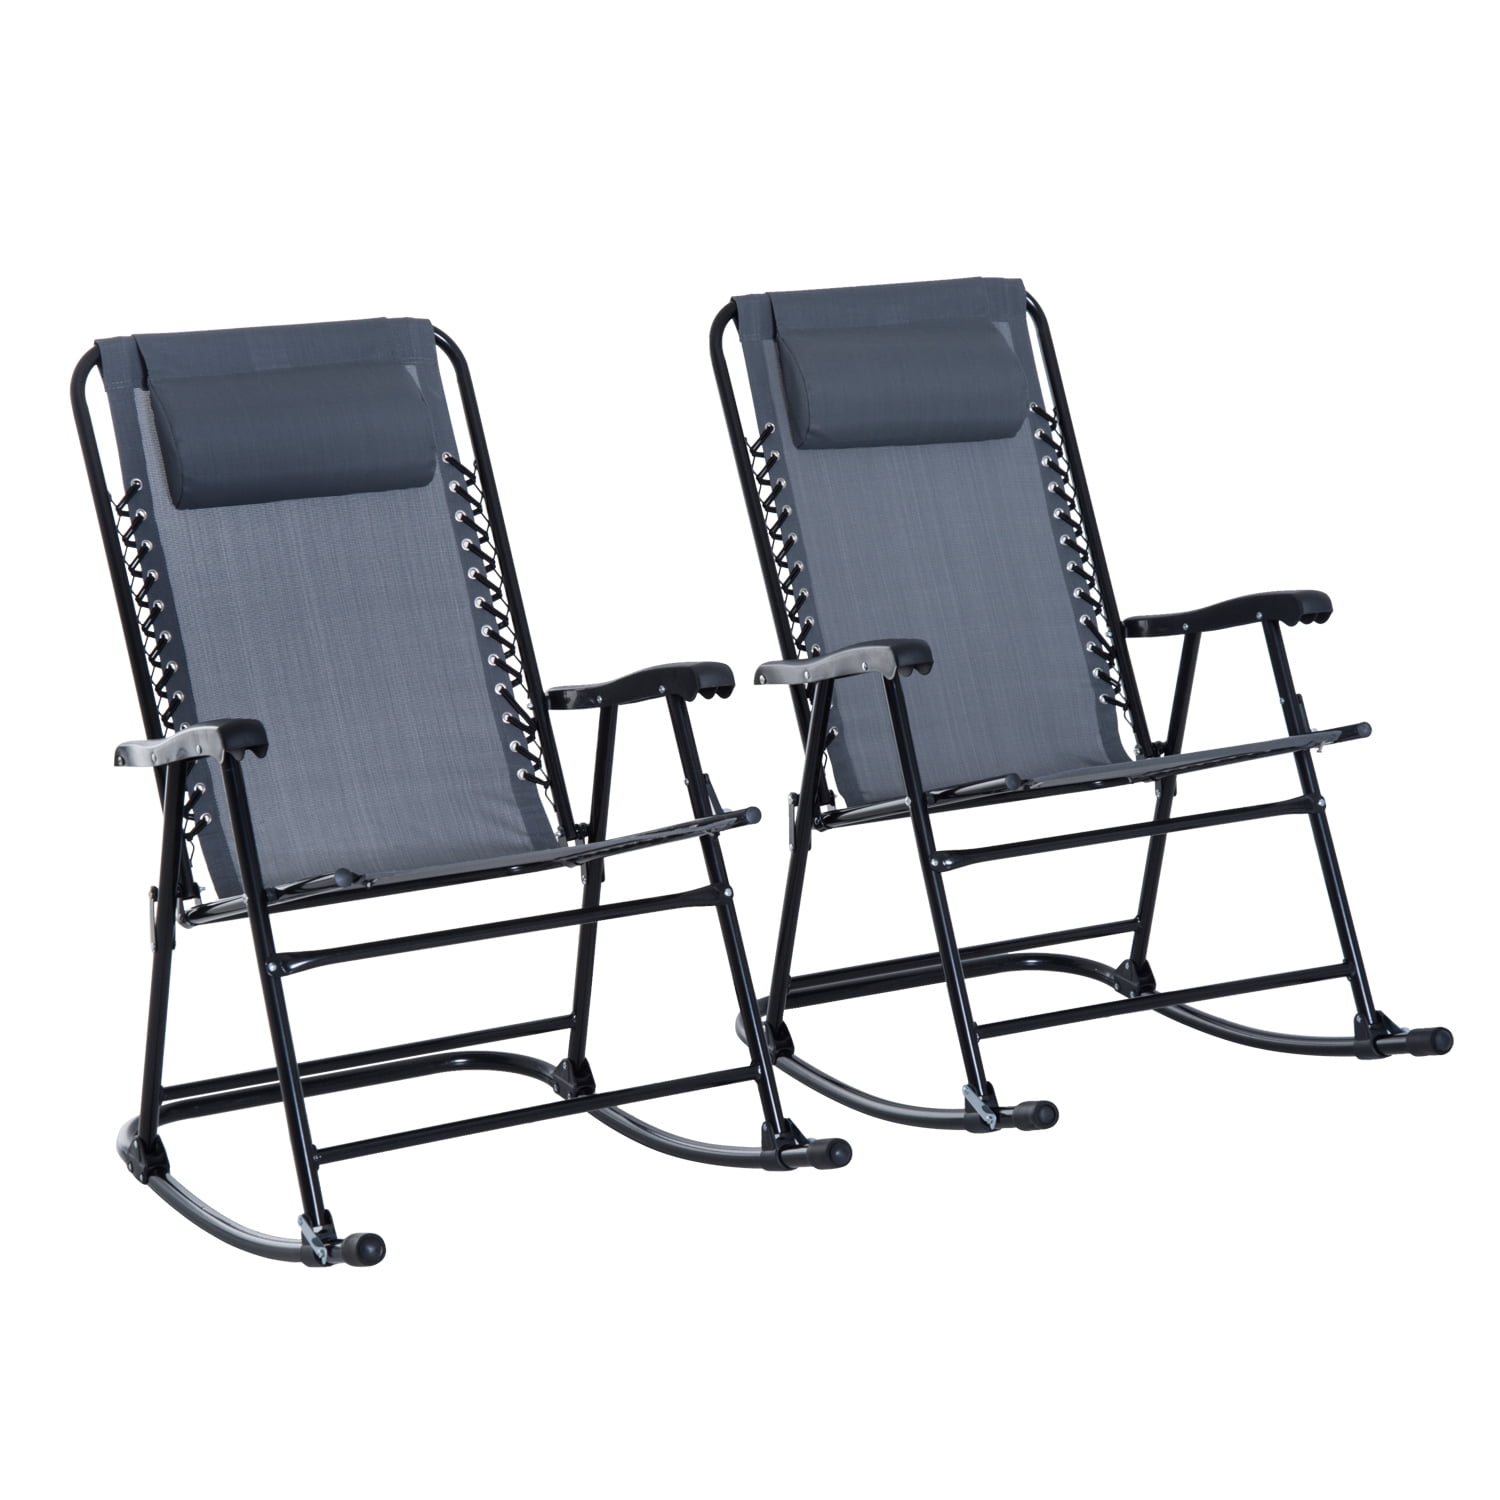 Clearance Sale Outsunny Breathable Mesh Rocking Chair for Outdoor Recliner Seat 